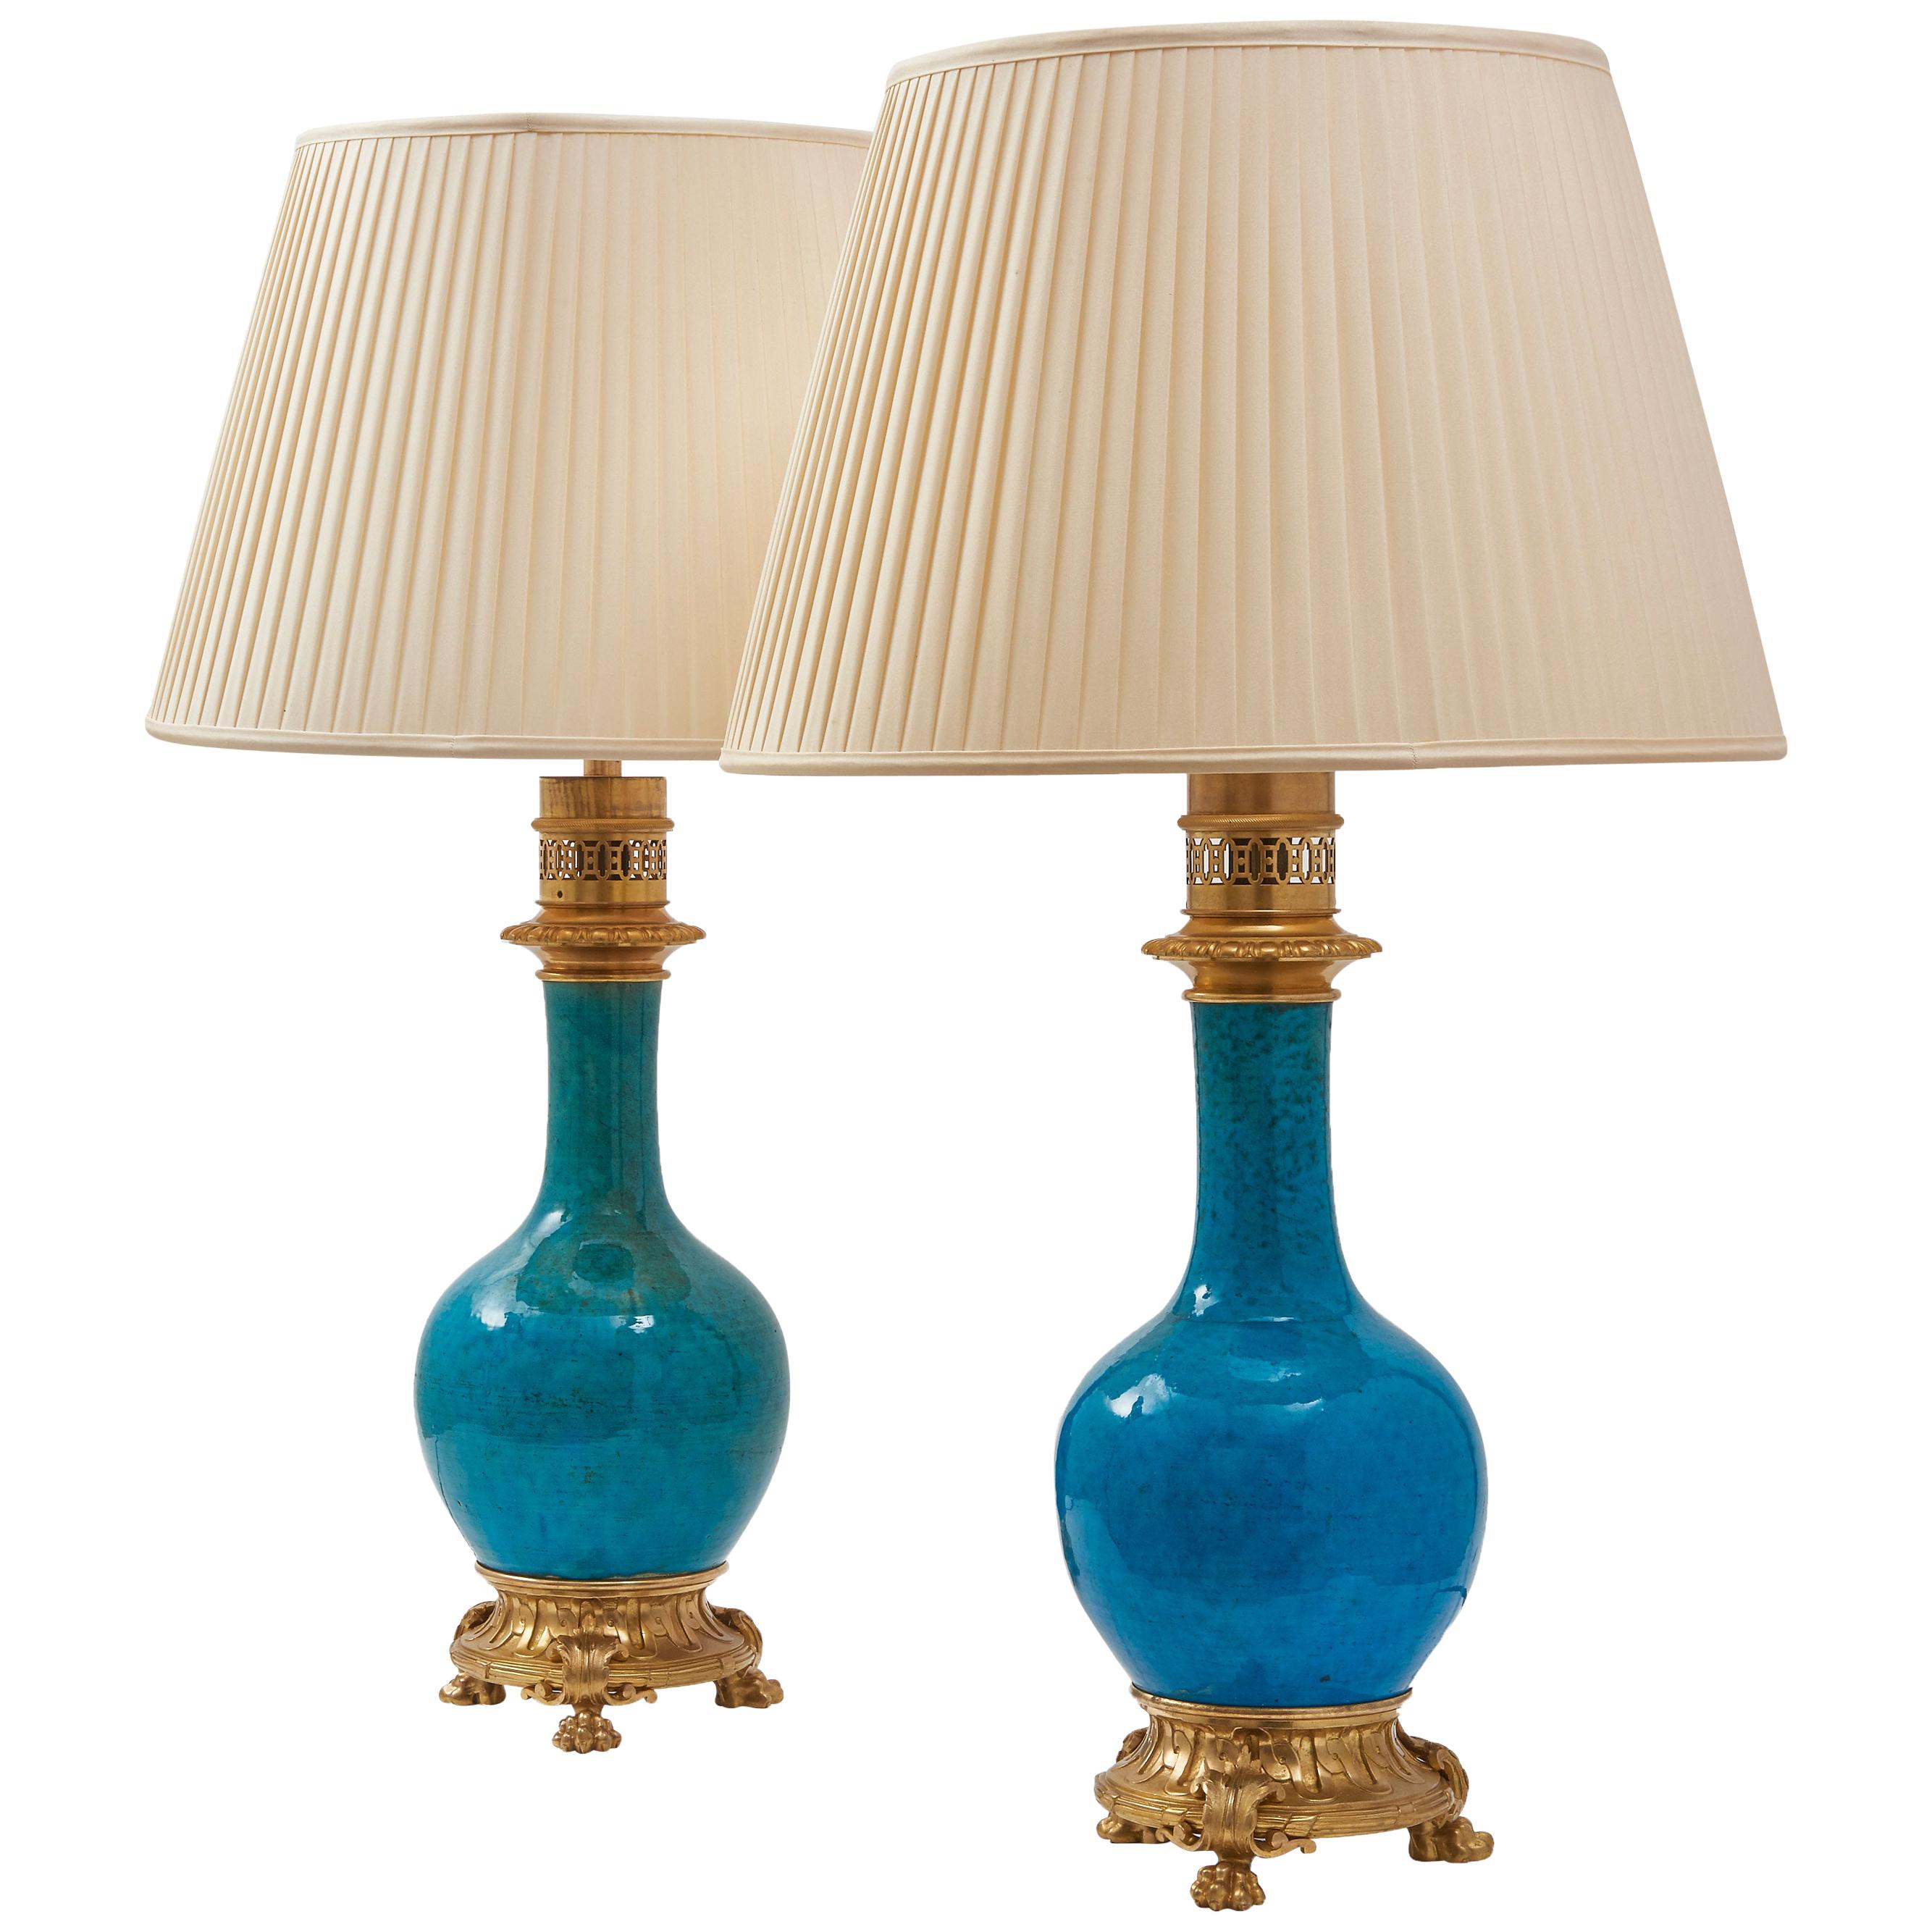 Pair of Chinese Turquoise Monochrome Porcelain Lamps, circa 1880 For Sale